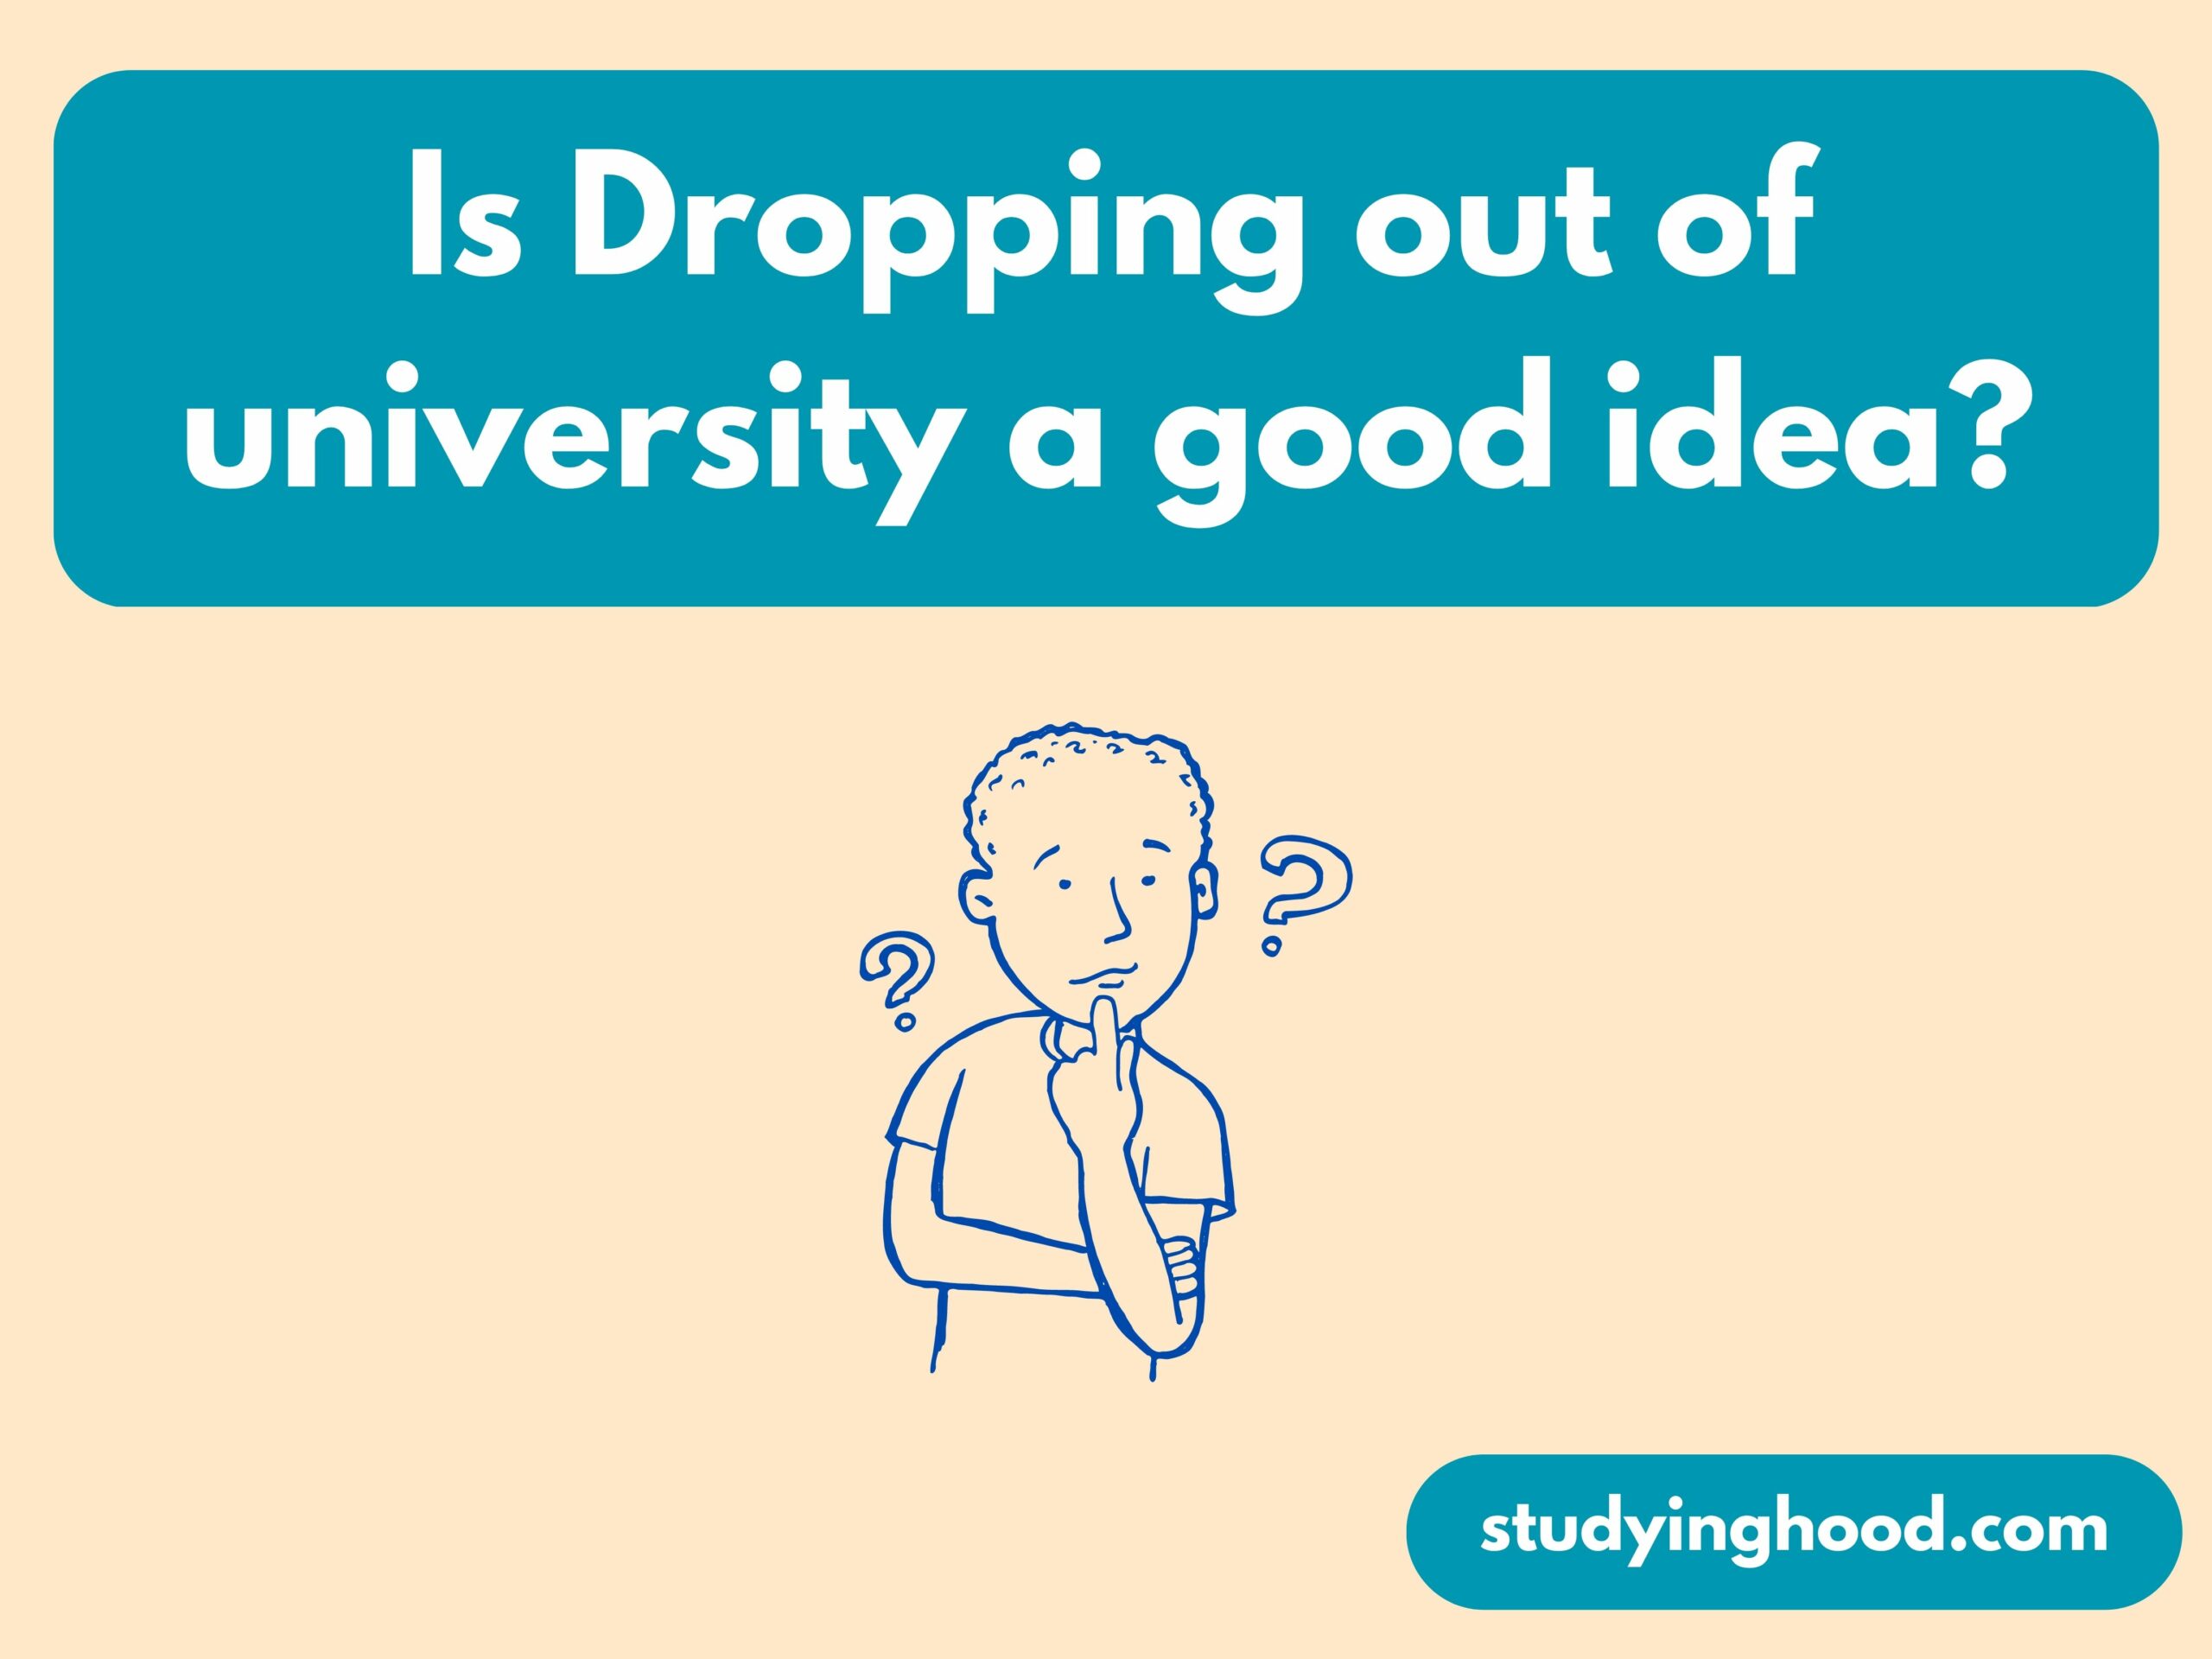 Is Dropping out of university a good idea?